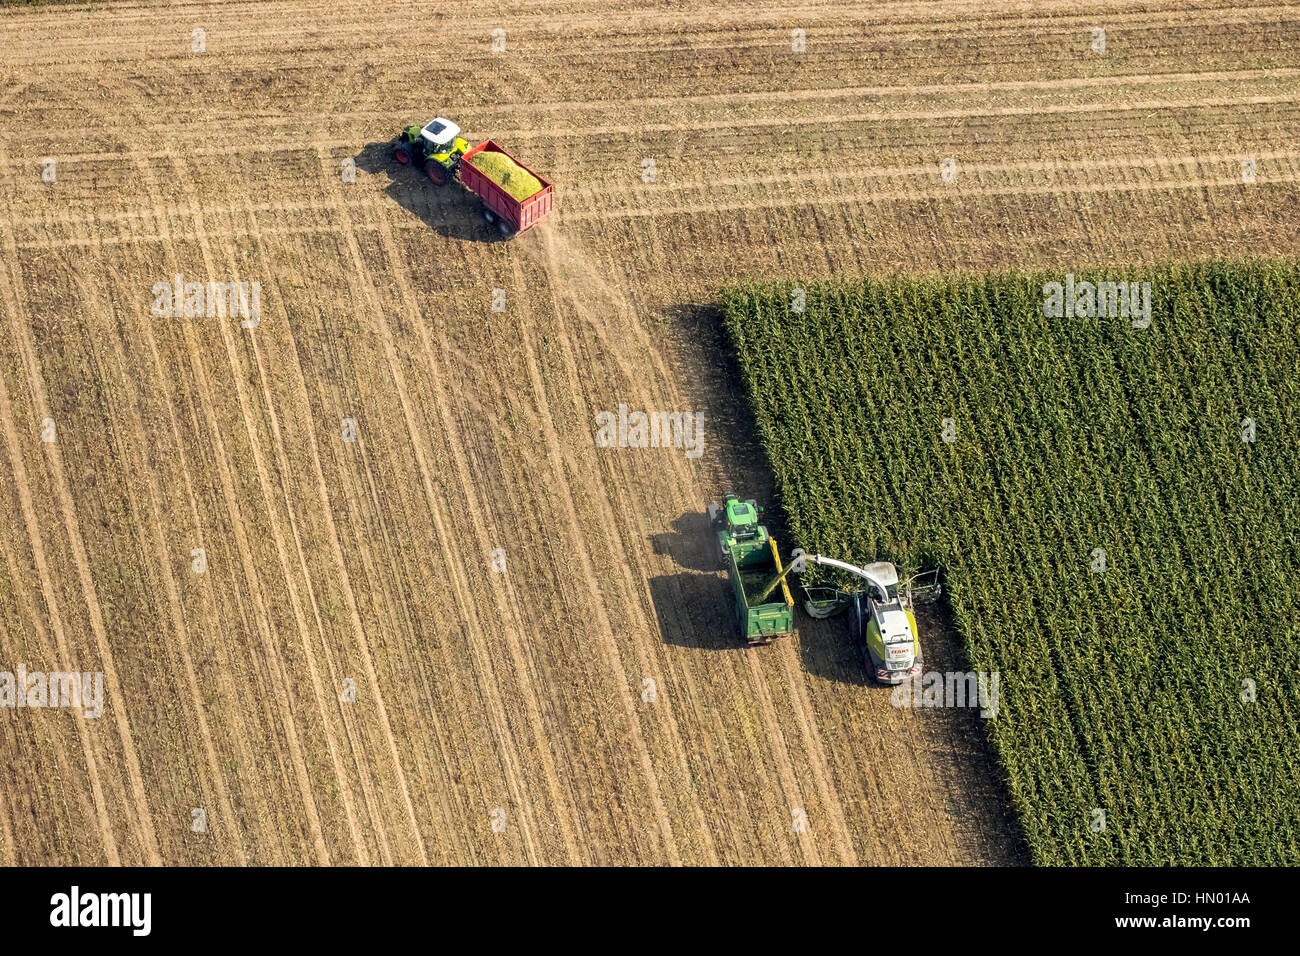 Corn harvest with mower and tractor, cornfield, crop, agriculture, Dortmund, Ruhr district, North Rhine-Westphalia, Germany Stock Photo